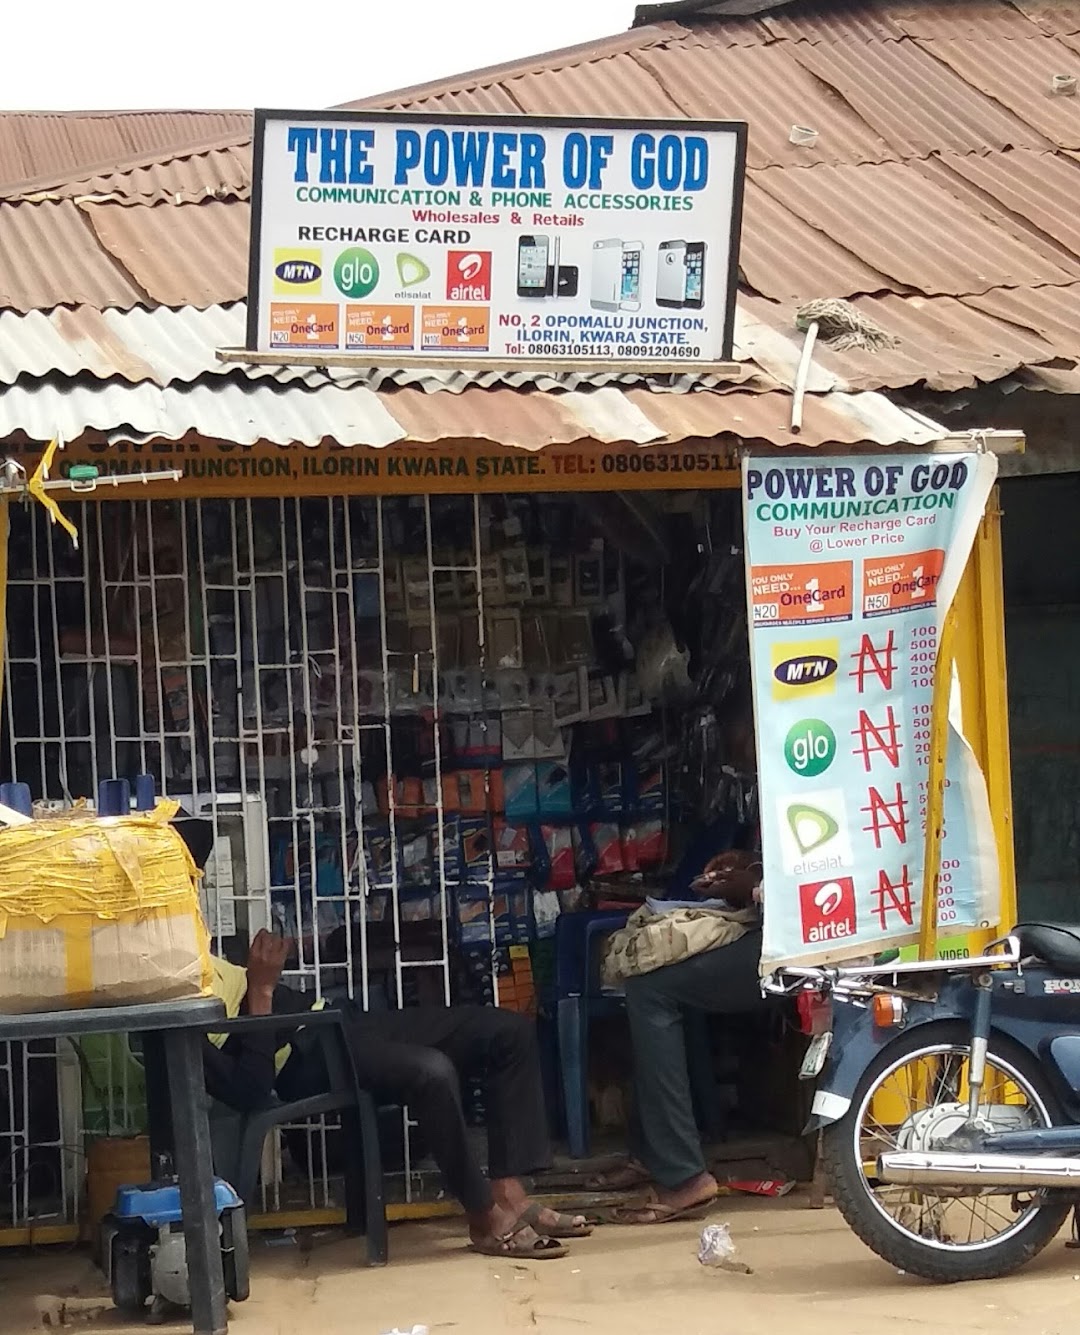 The Power Of God Communication & Phone Accessories